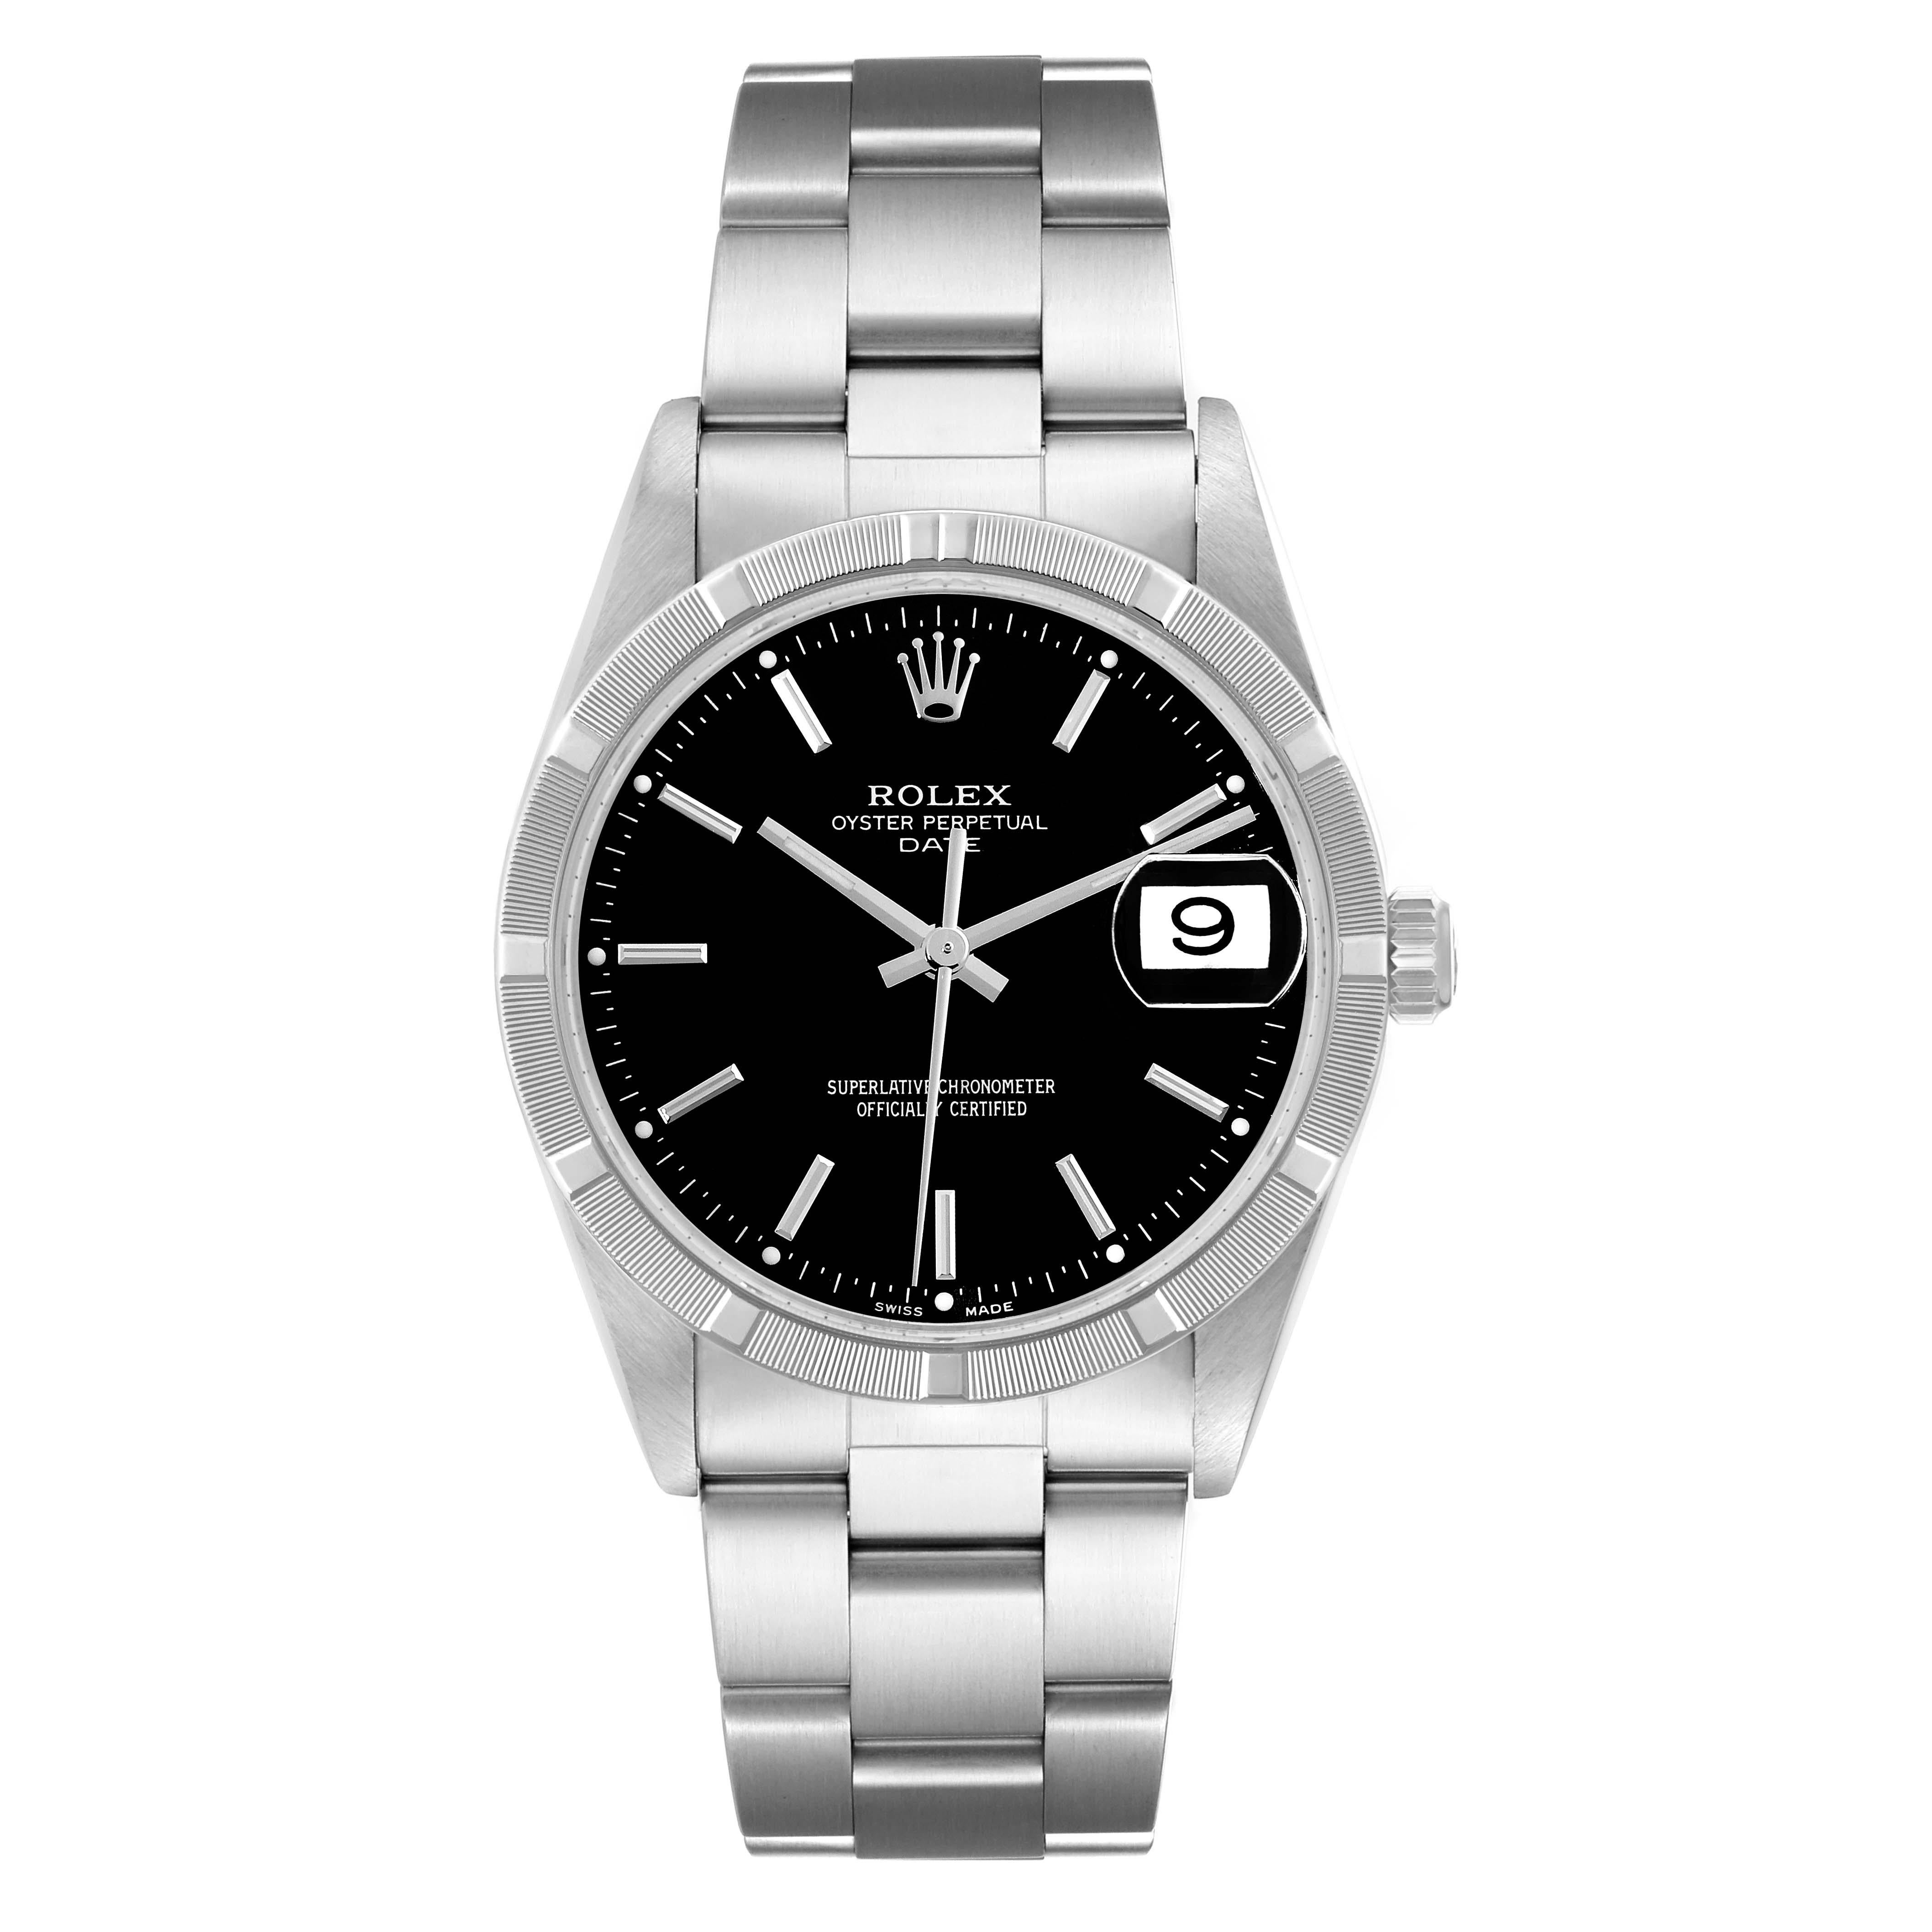 Rolex Date Black Dial Engine Turned Bezel Steel Mens Watch 15210. Officially certified chronometer automatic self-winding movement. Stainless steel oyster case 34 mm in diameter. Rolex logo on the crown. Stainless steel engine turned bezel. Scratch